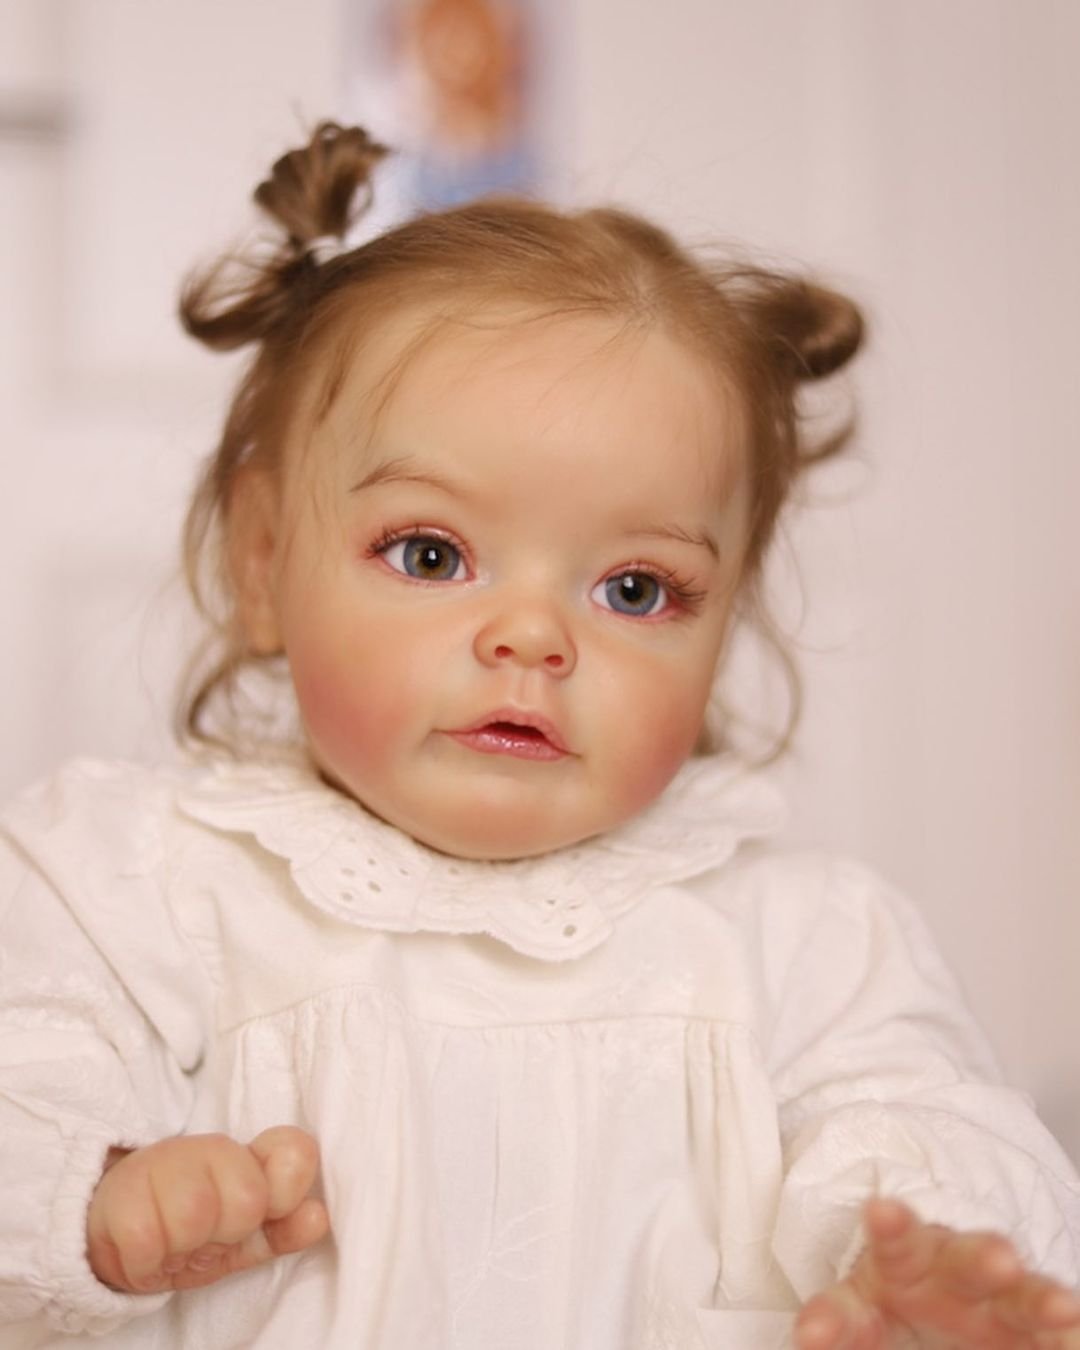 Things You Should Know Before Buying a Reality Reborn Doll